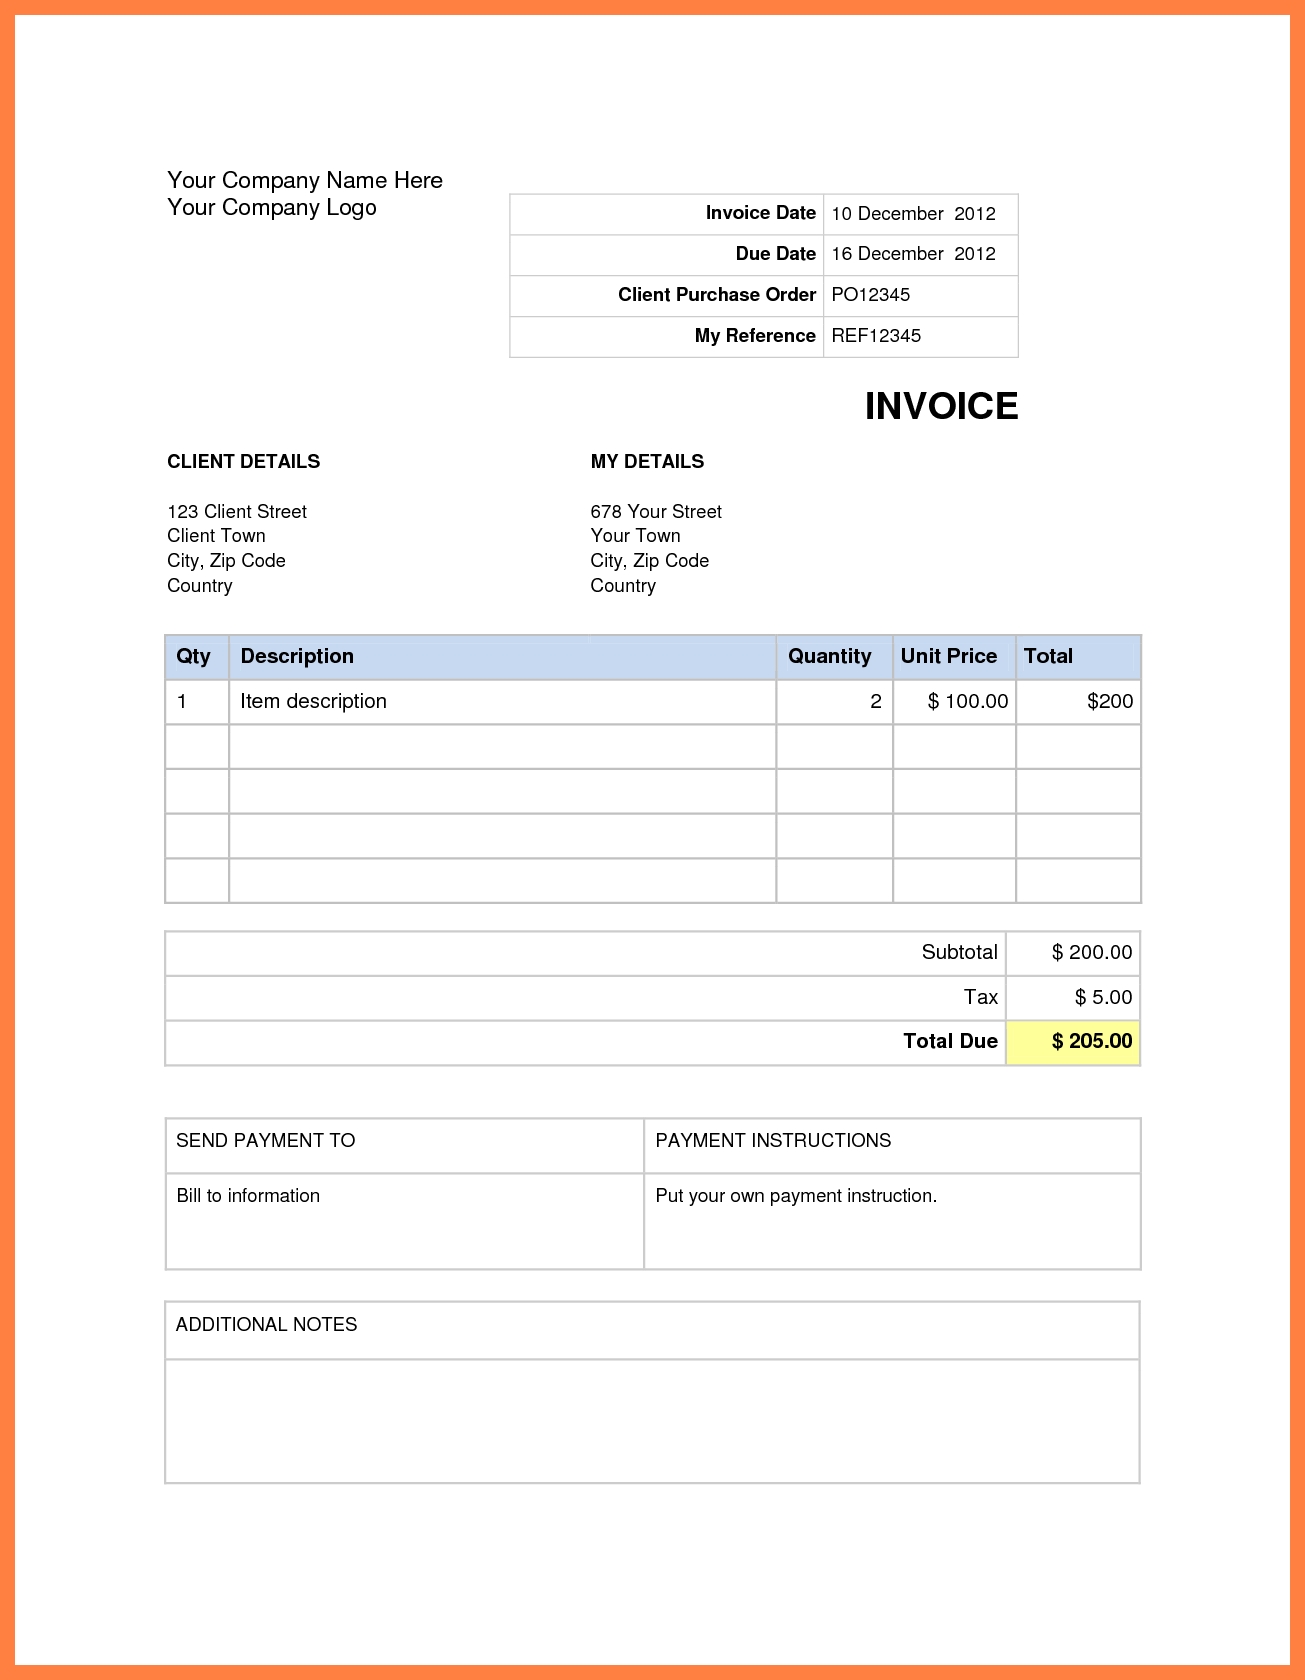 invoice sample word document 9 invoice template word doc appointmentletters 1305 X 1680